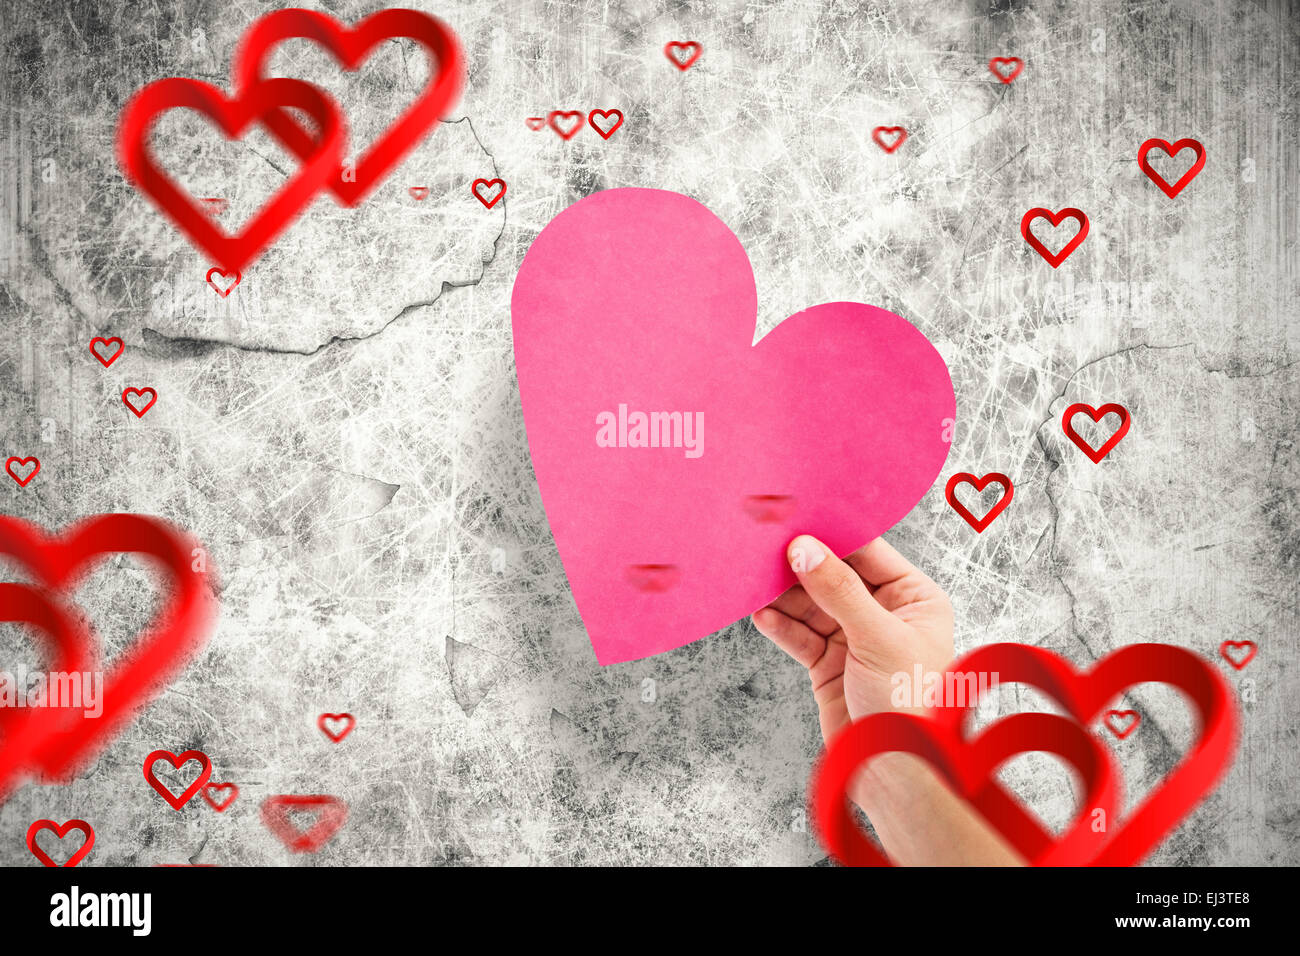 Composite image of heart Stock Photo